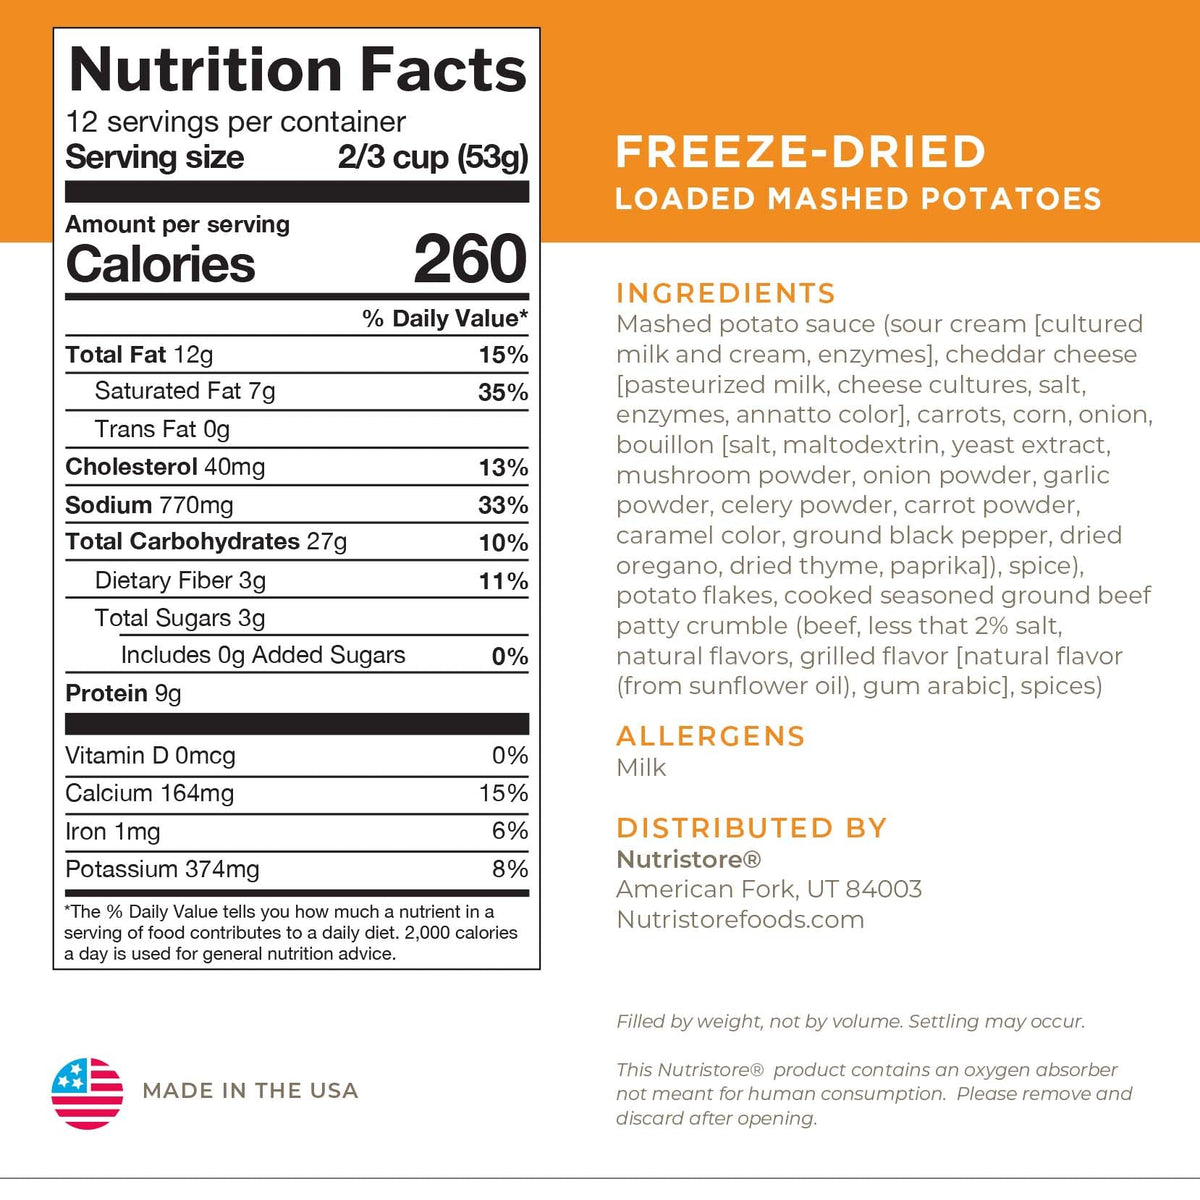 Loaded Mashed Potatoes Freeze Dried - #10 Can by Nutristore